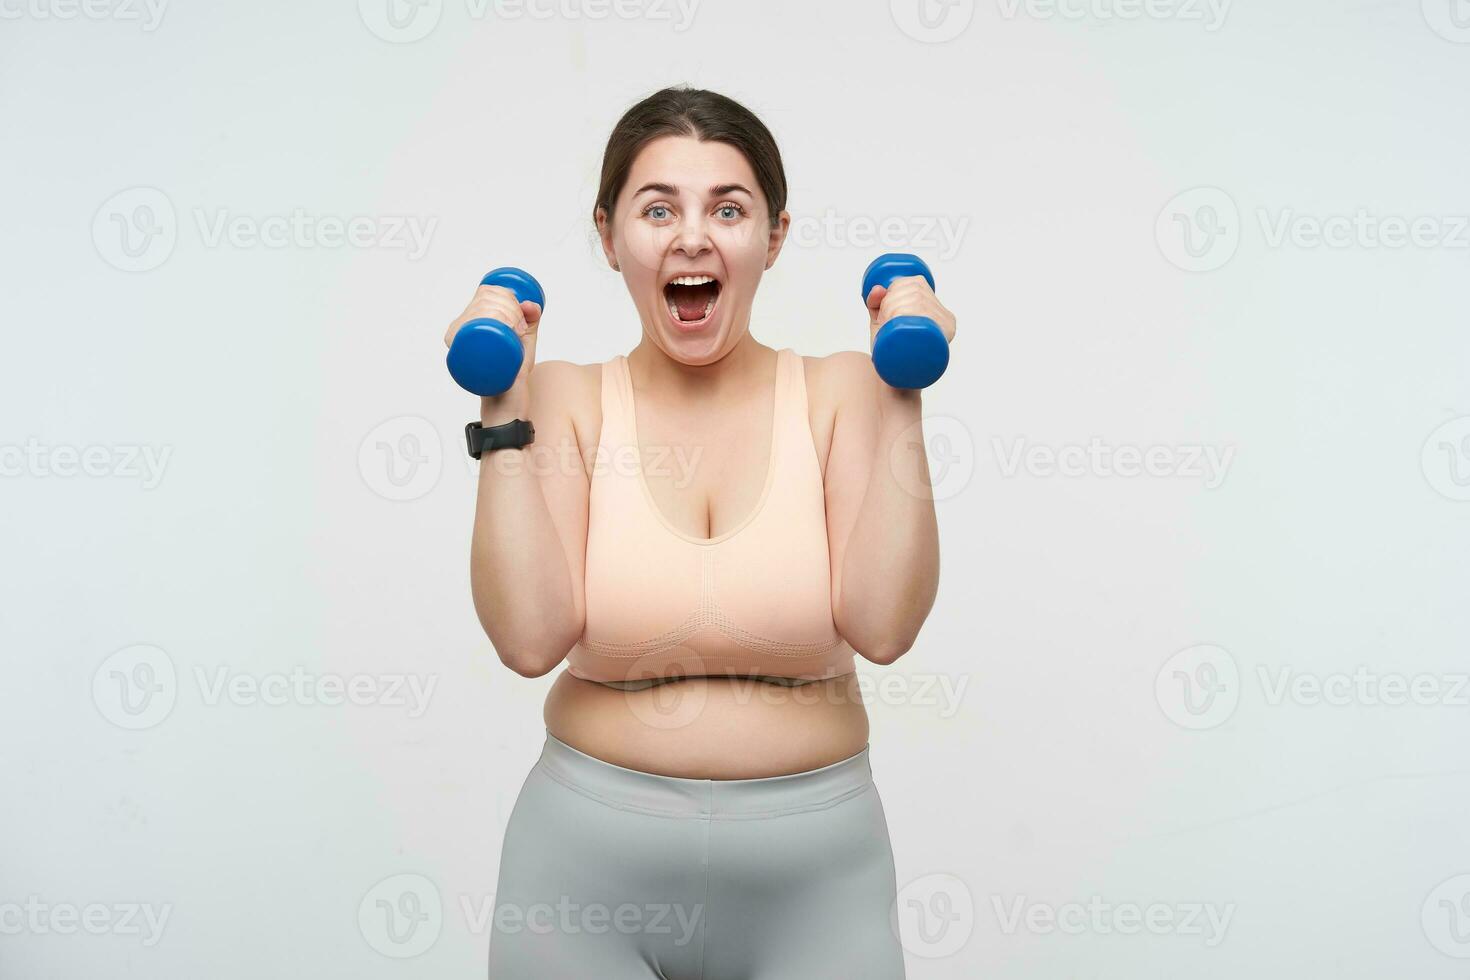 Indoor photo of young brunette plump lady with chubby face lifting dumbbells and looking excitedly at camera while posing over white background. Bodycare concept